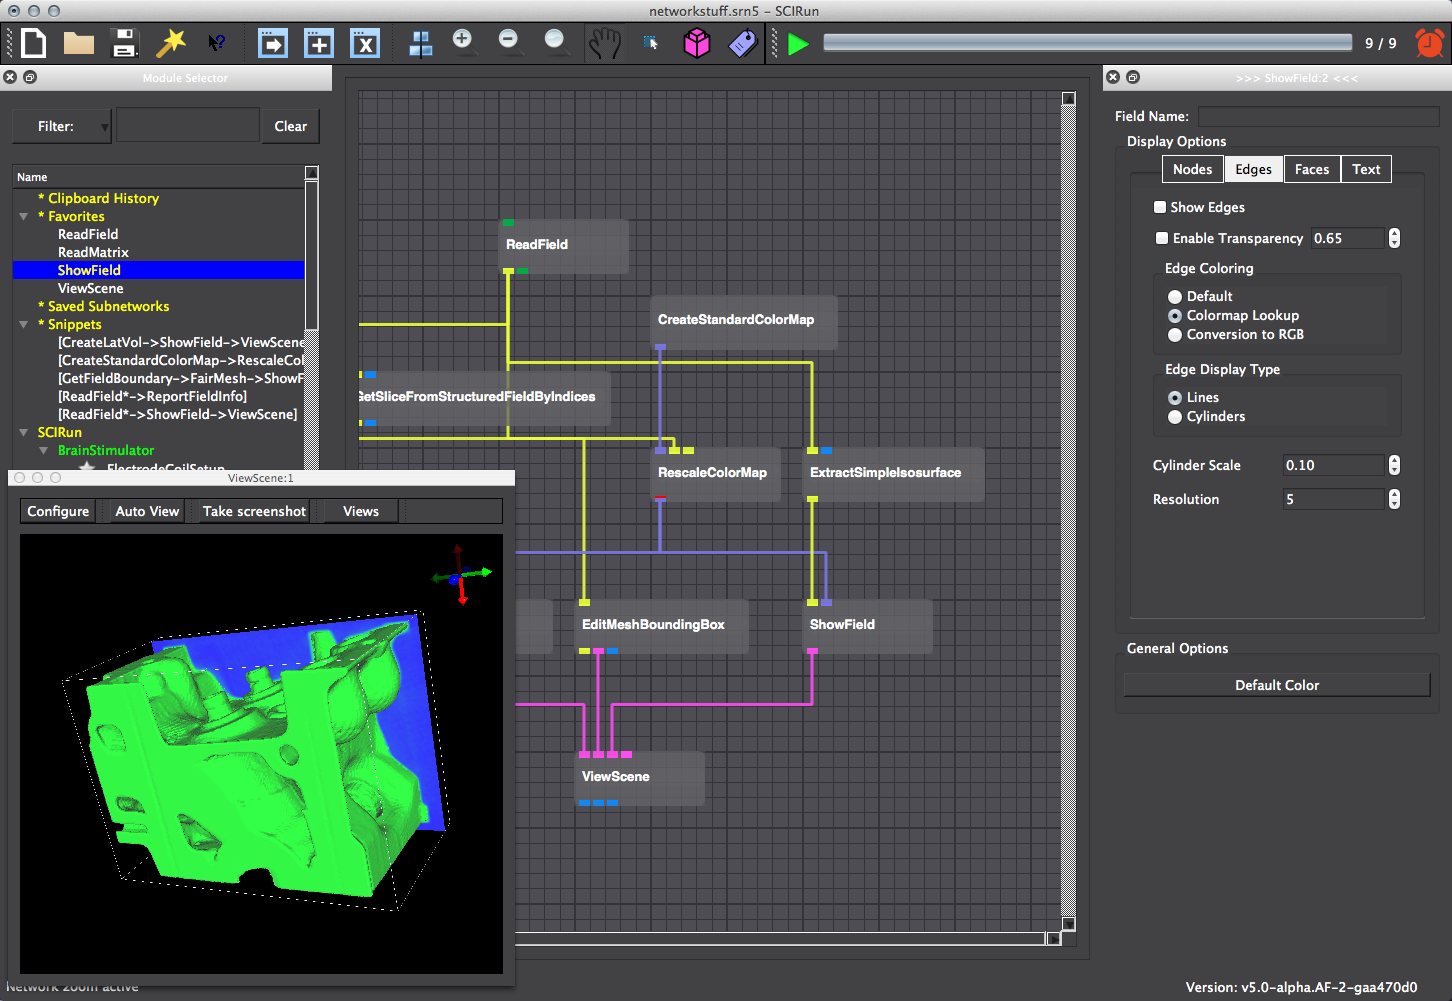 Adjusting parameters within the ShowField UI helps to better visualize the isosurface.